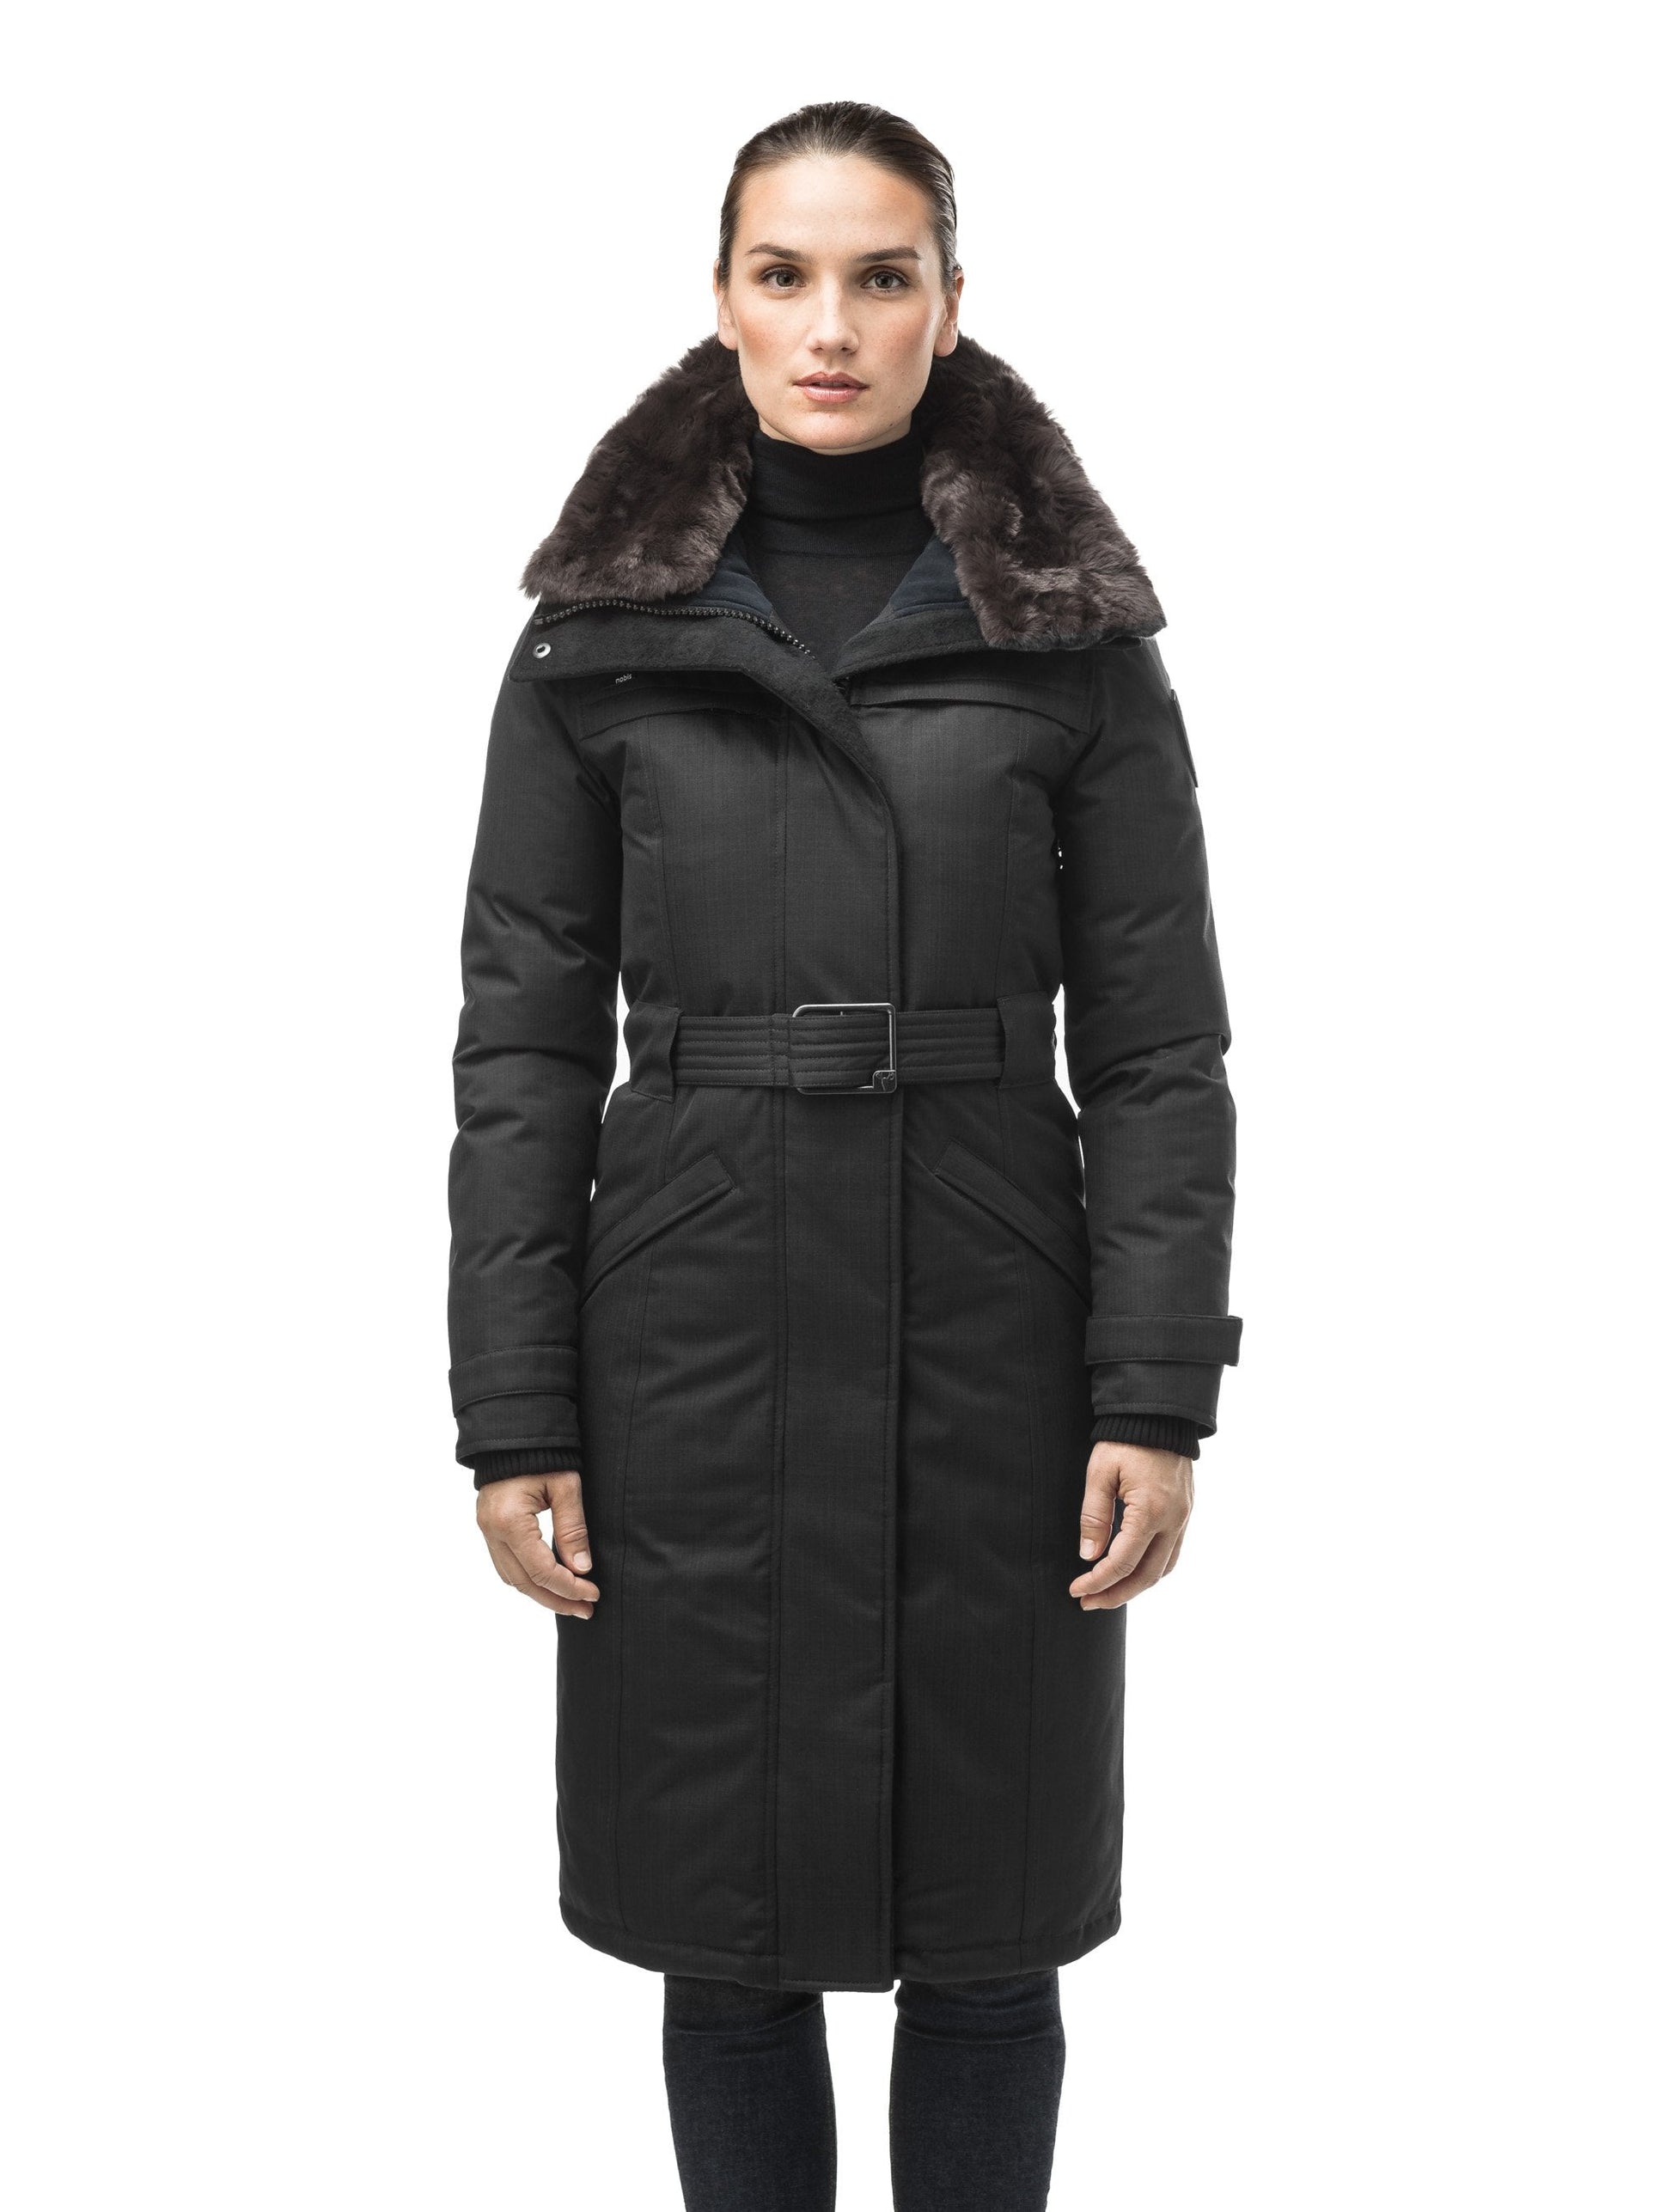 Women's knee length down filled parka with a belted waist and fully removable Coyote and Rex Rabbit fur ruffs in CH Black